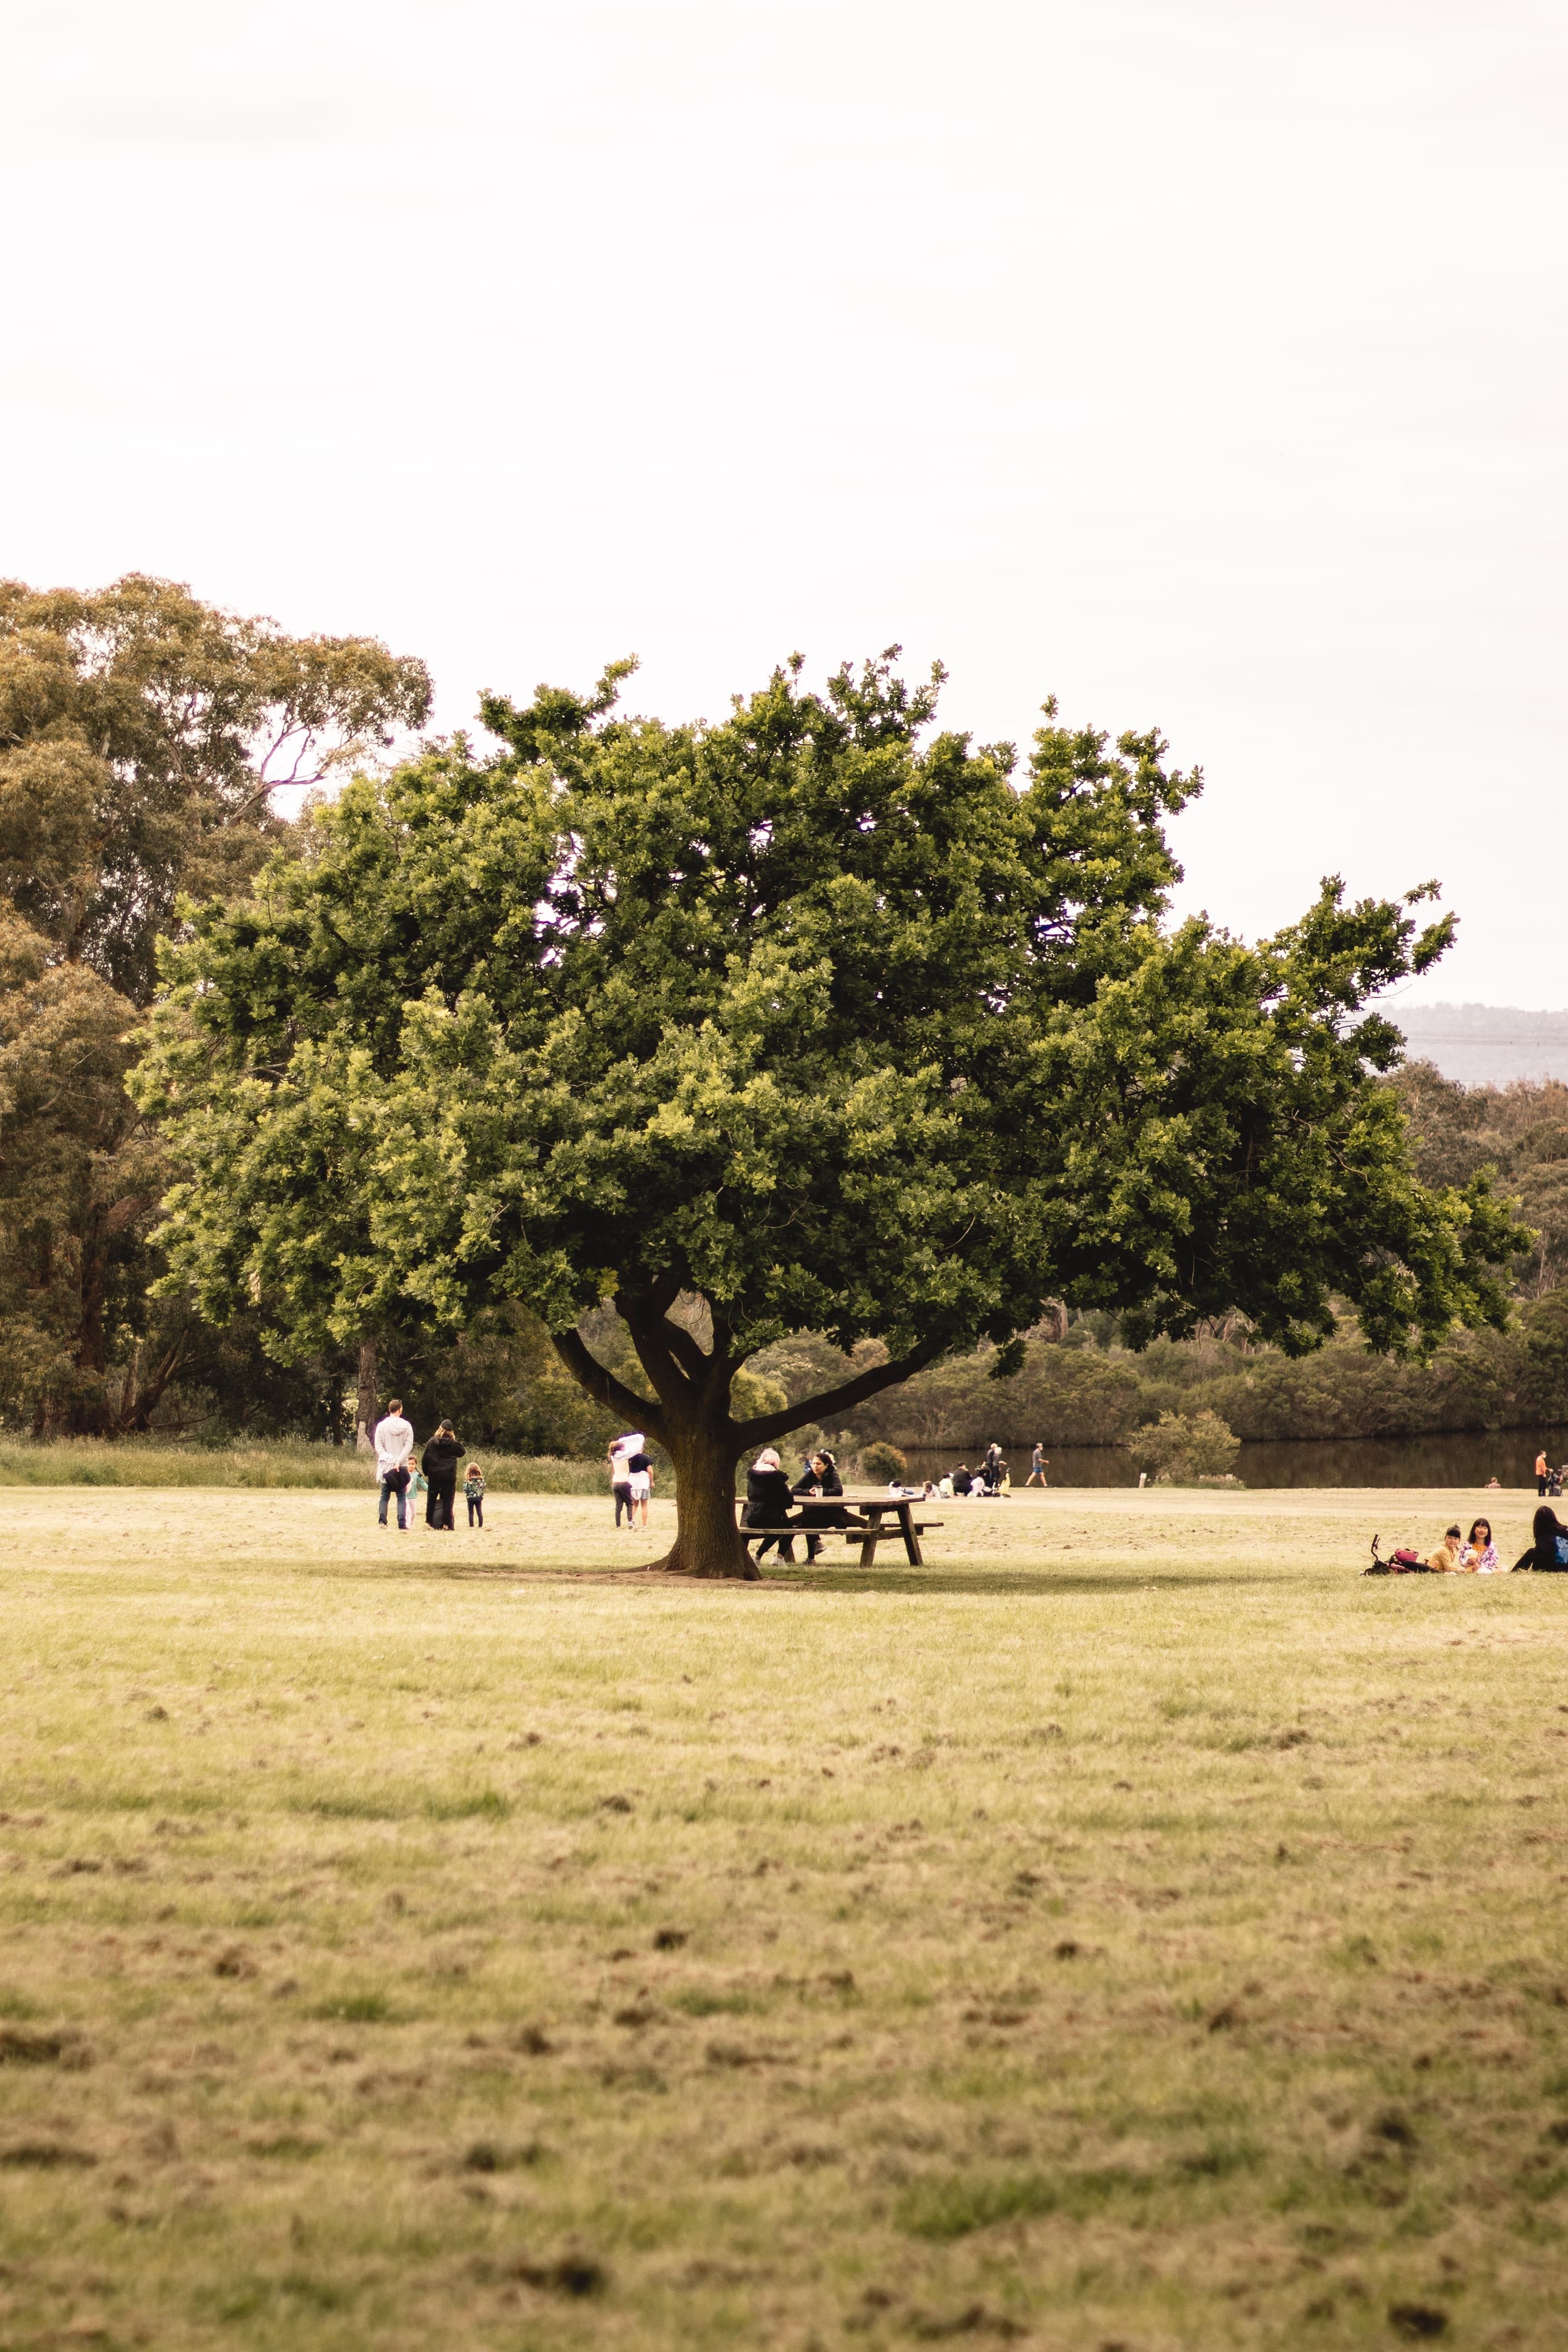 large oak in field of grass with people milling around